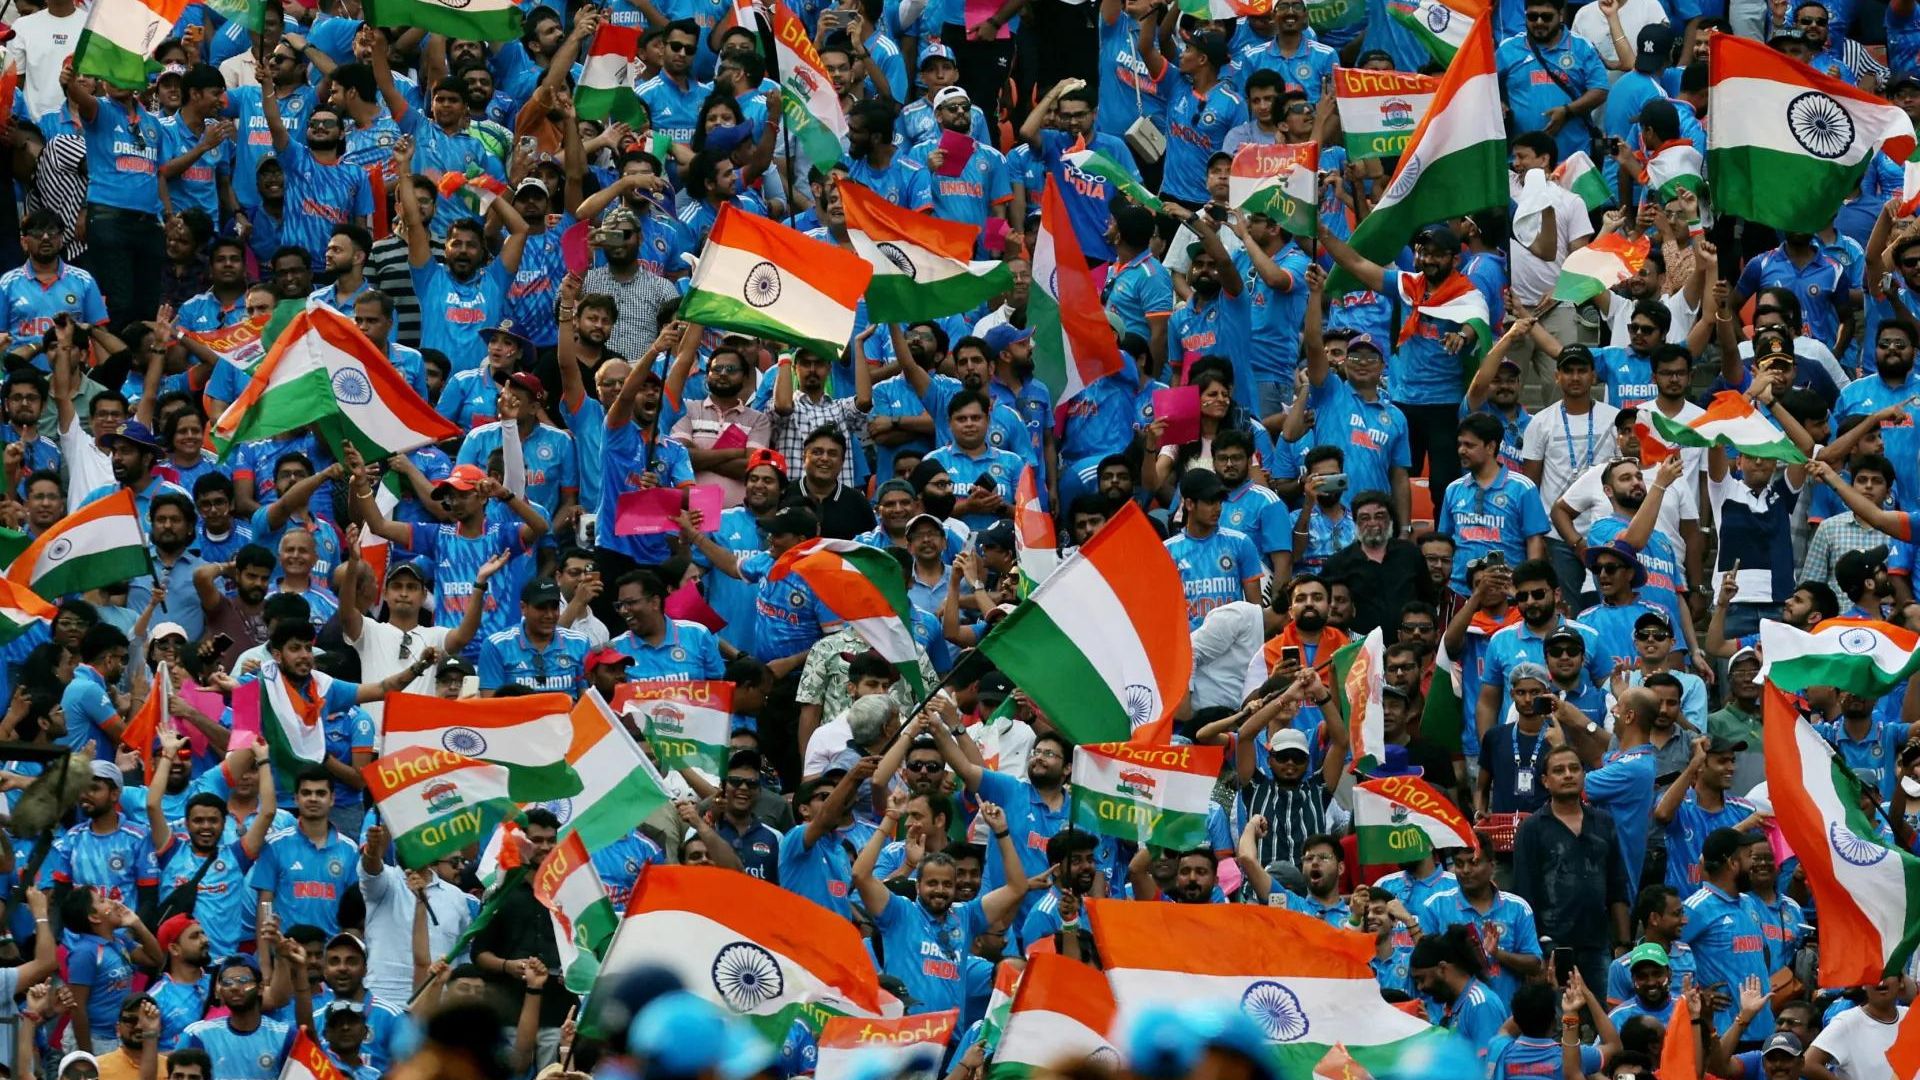 Watch: Sea Of People Gather At Marine Drive For Team India’s Historic Victory Parade